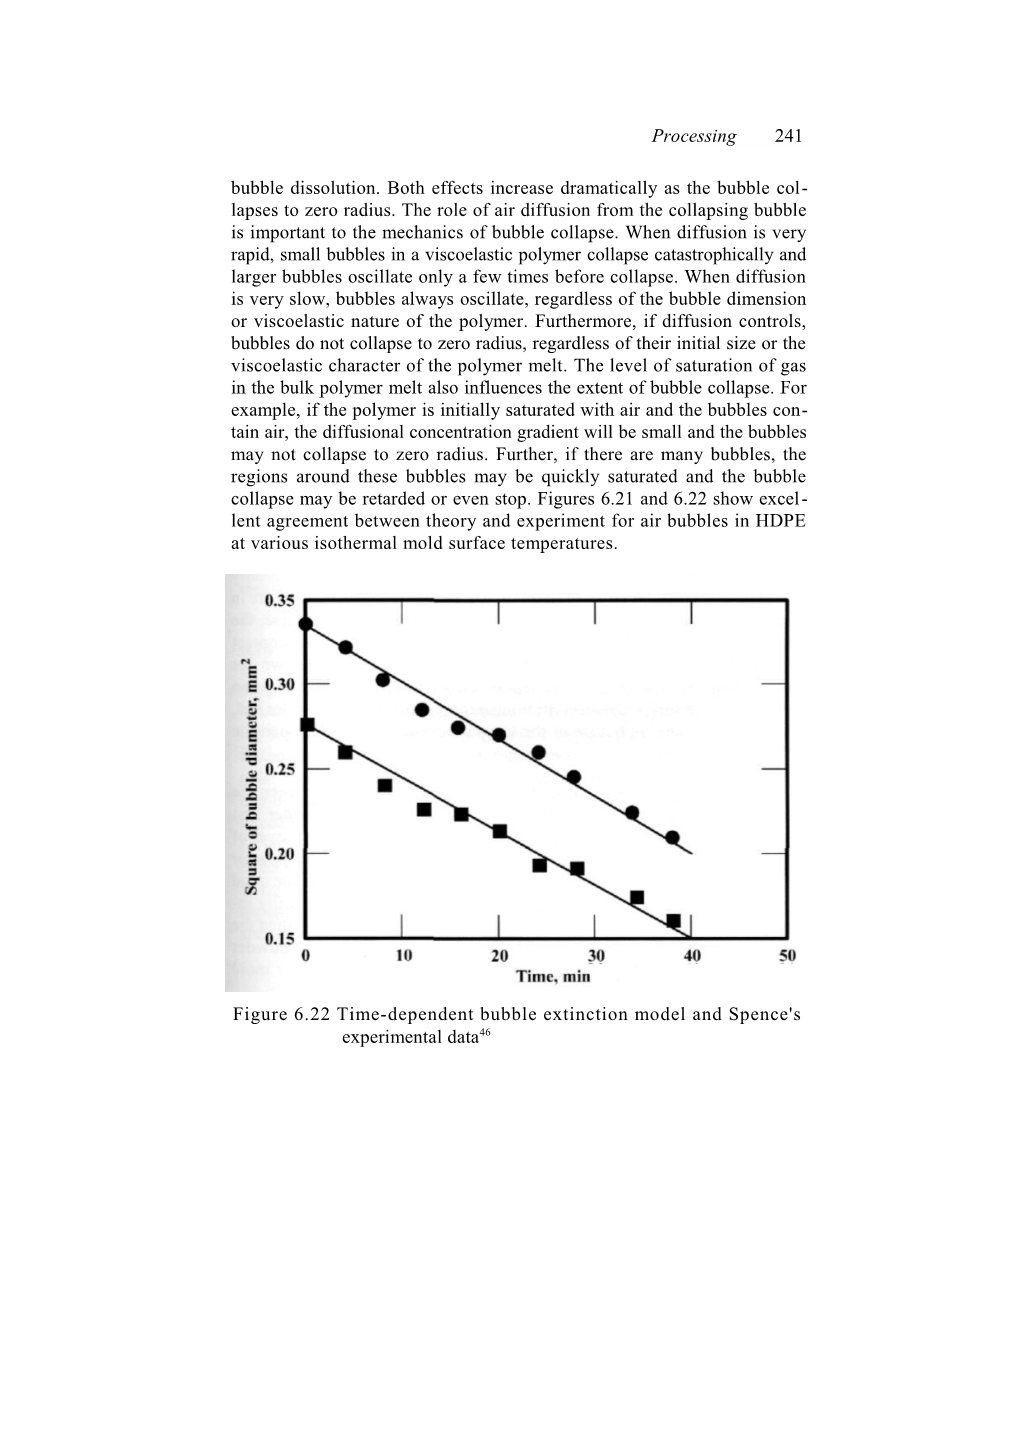 Figure 6.22 Time-Dependent Bubble Extinction Model and Spence's Experimental Data46